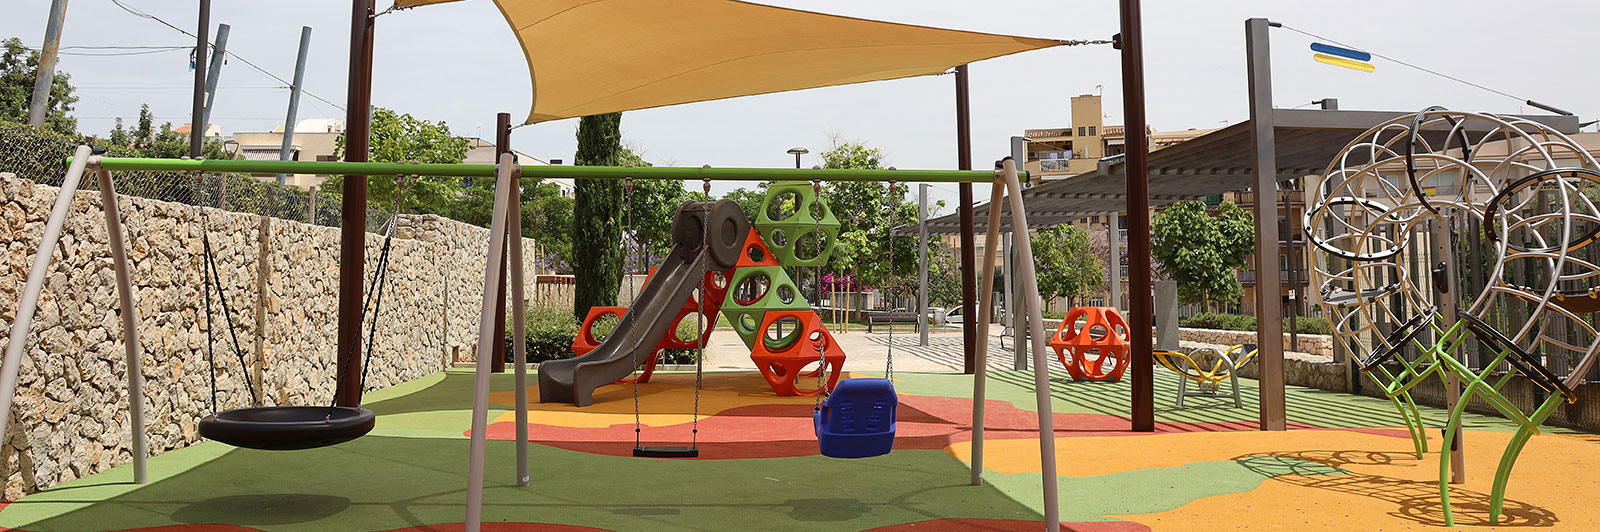 Overview of playground with swings and playcubes.